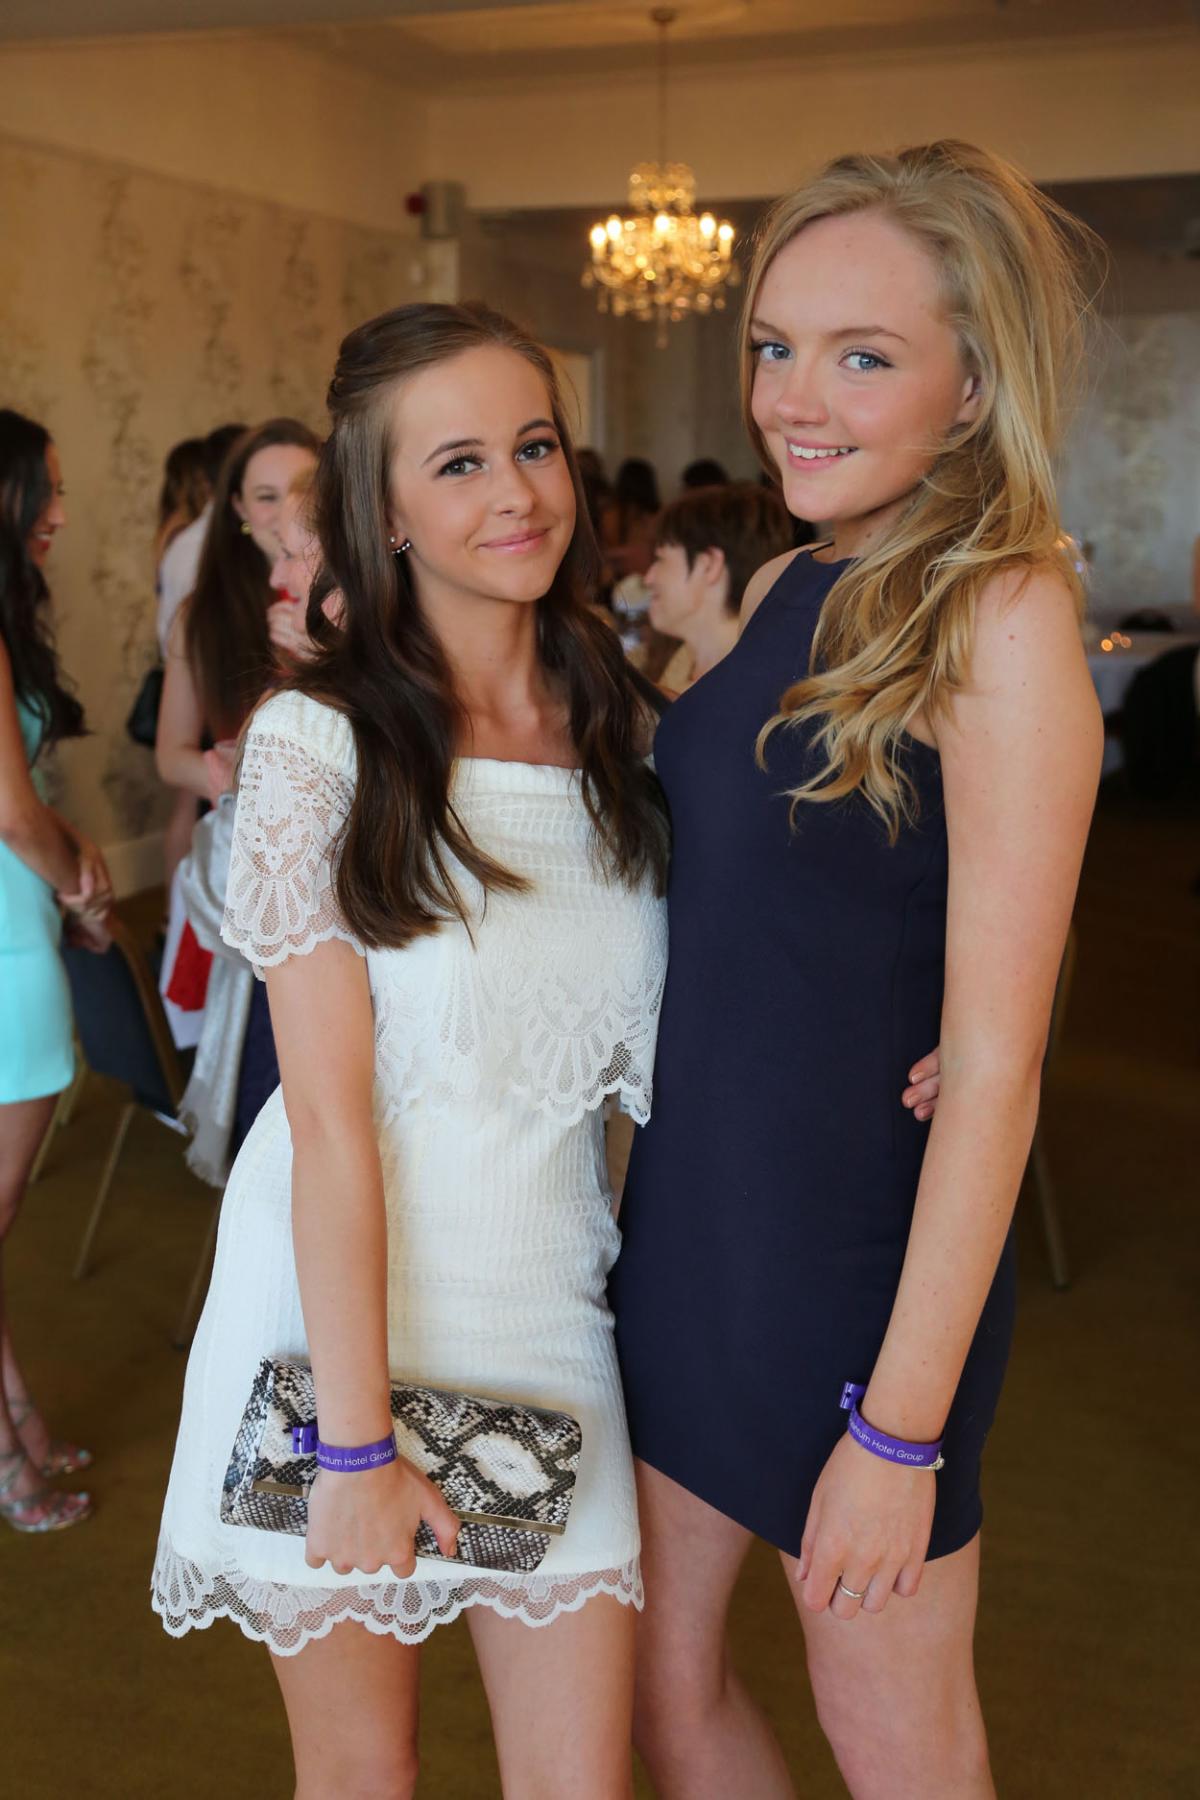 Pictures form Talbot Heath School Year 13 prom at the Ocean View Hotel in Bournemouth on Friday, June 19, 2015, by Corin Messer. 